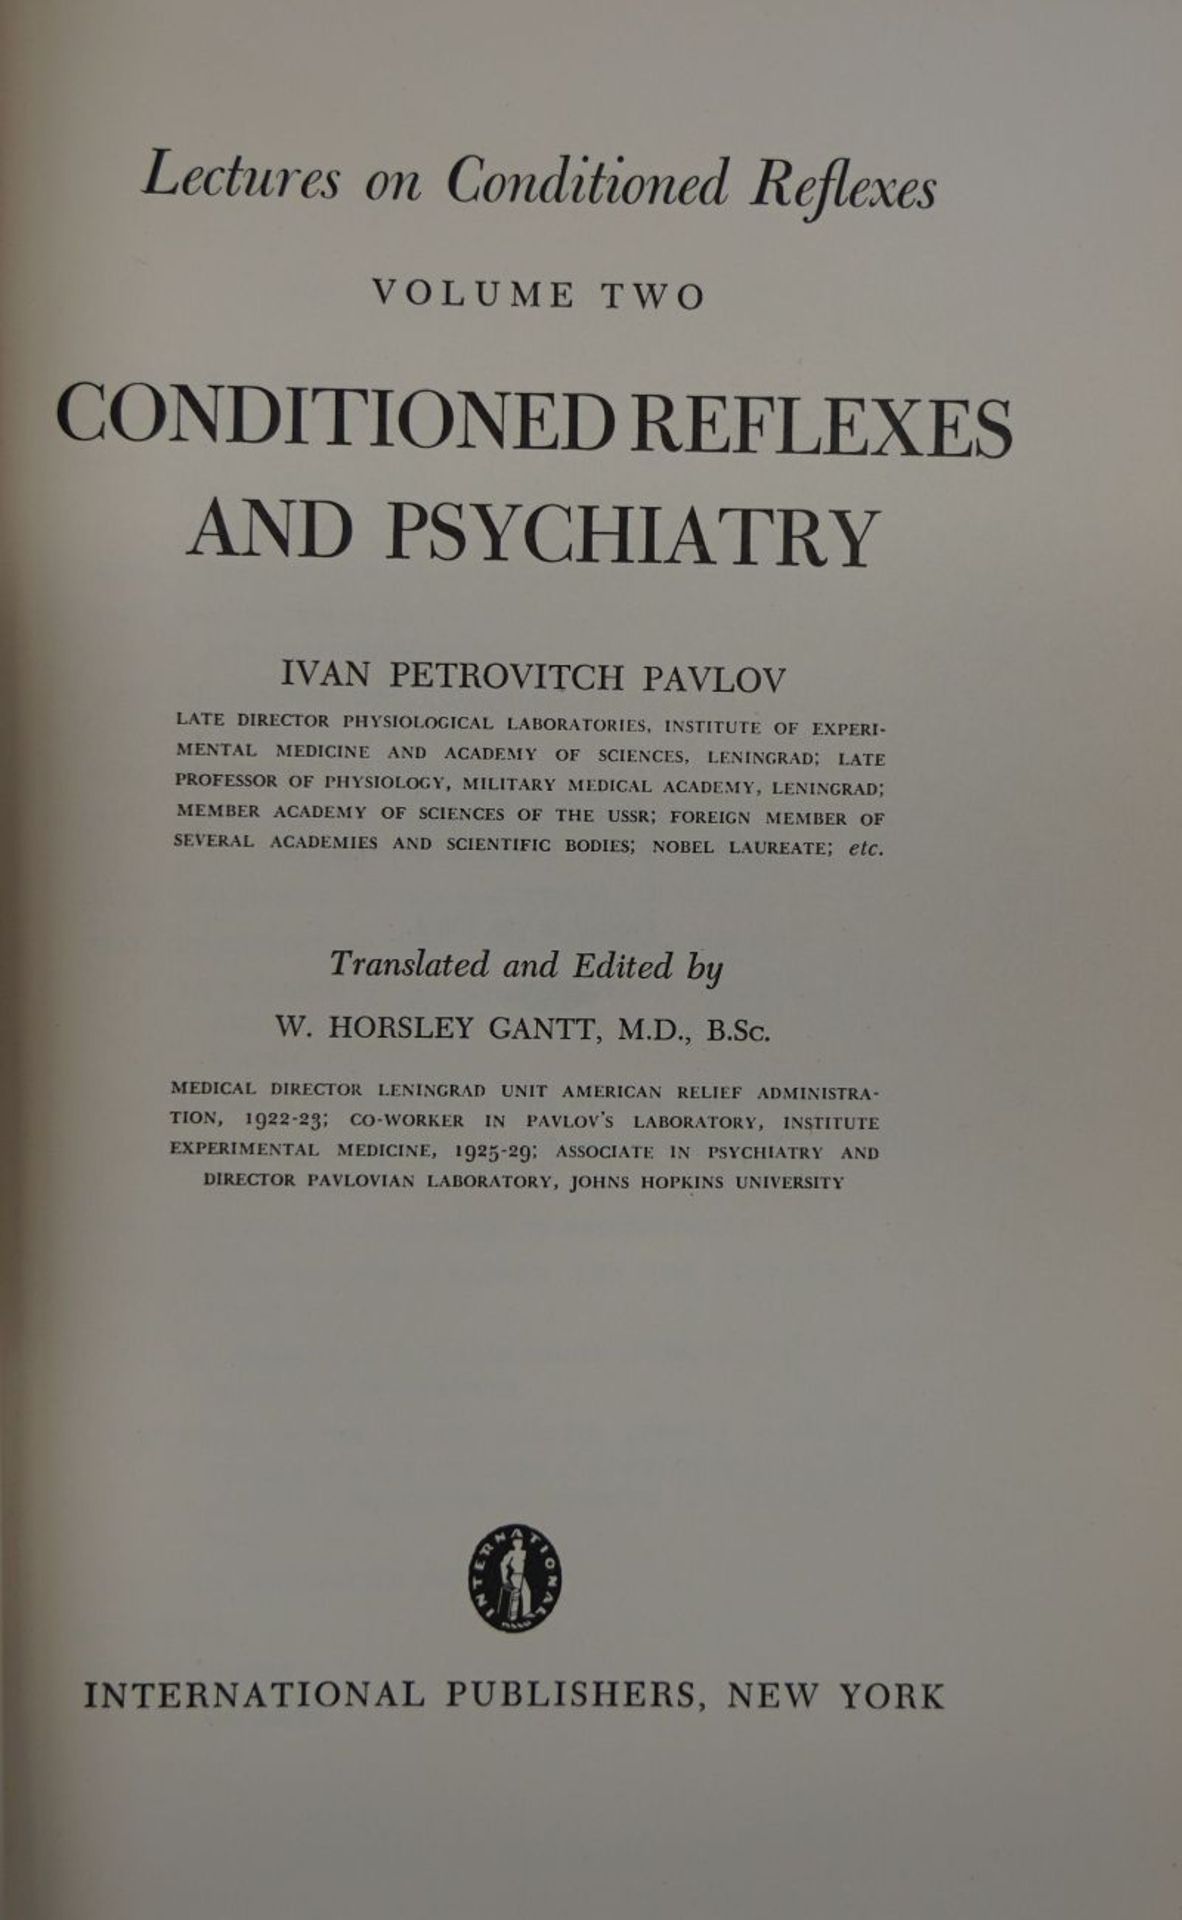 Pawlow, Iwan Petrowitsch: Lectures on Conditioned Reflexes